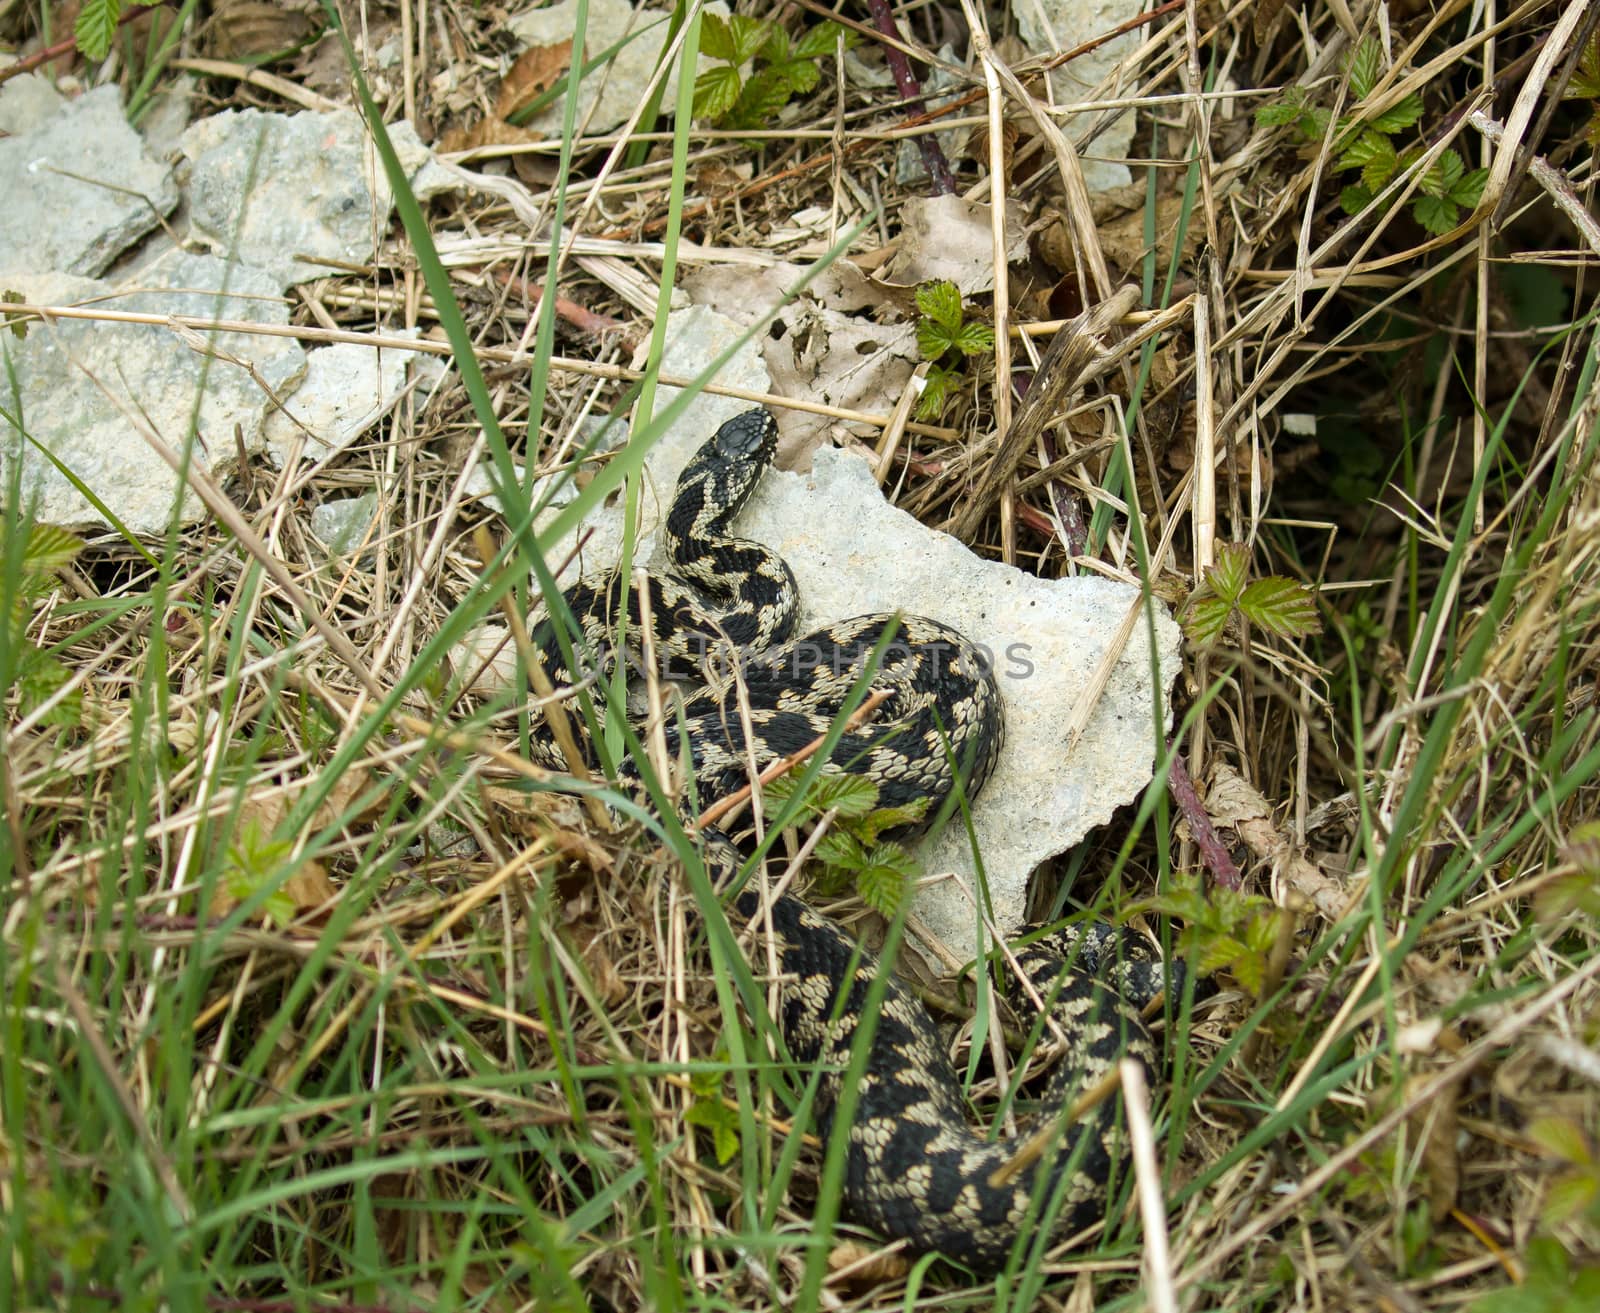 Adult Common European Adder or Viper snake in grassy undergrowth